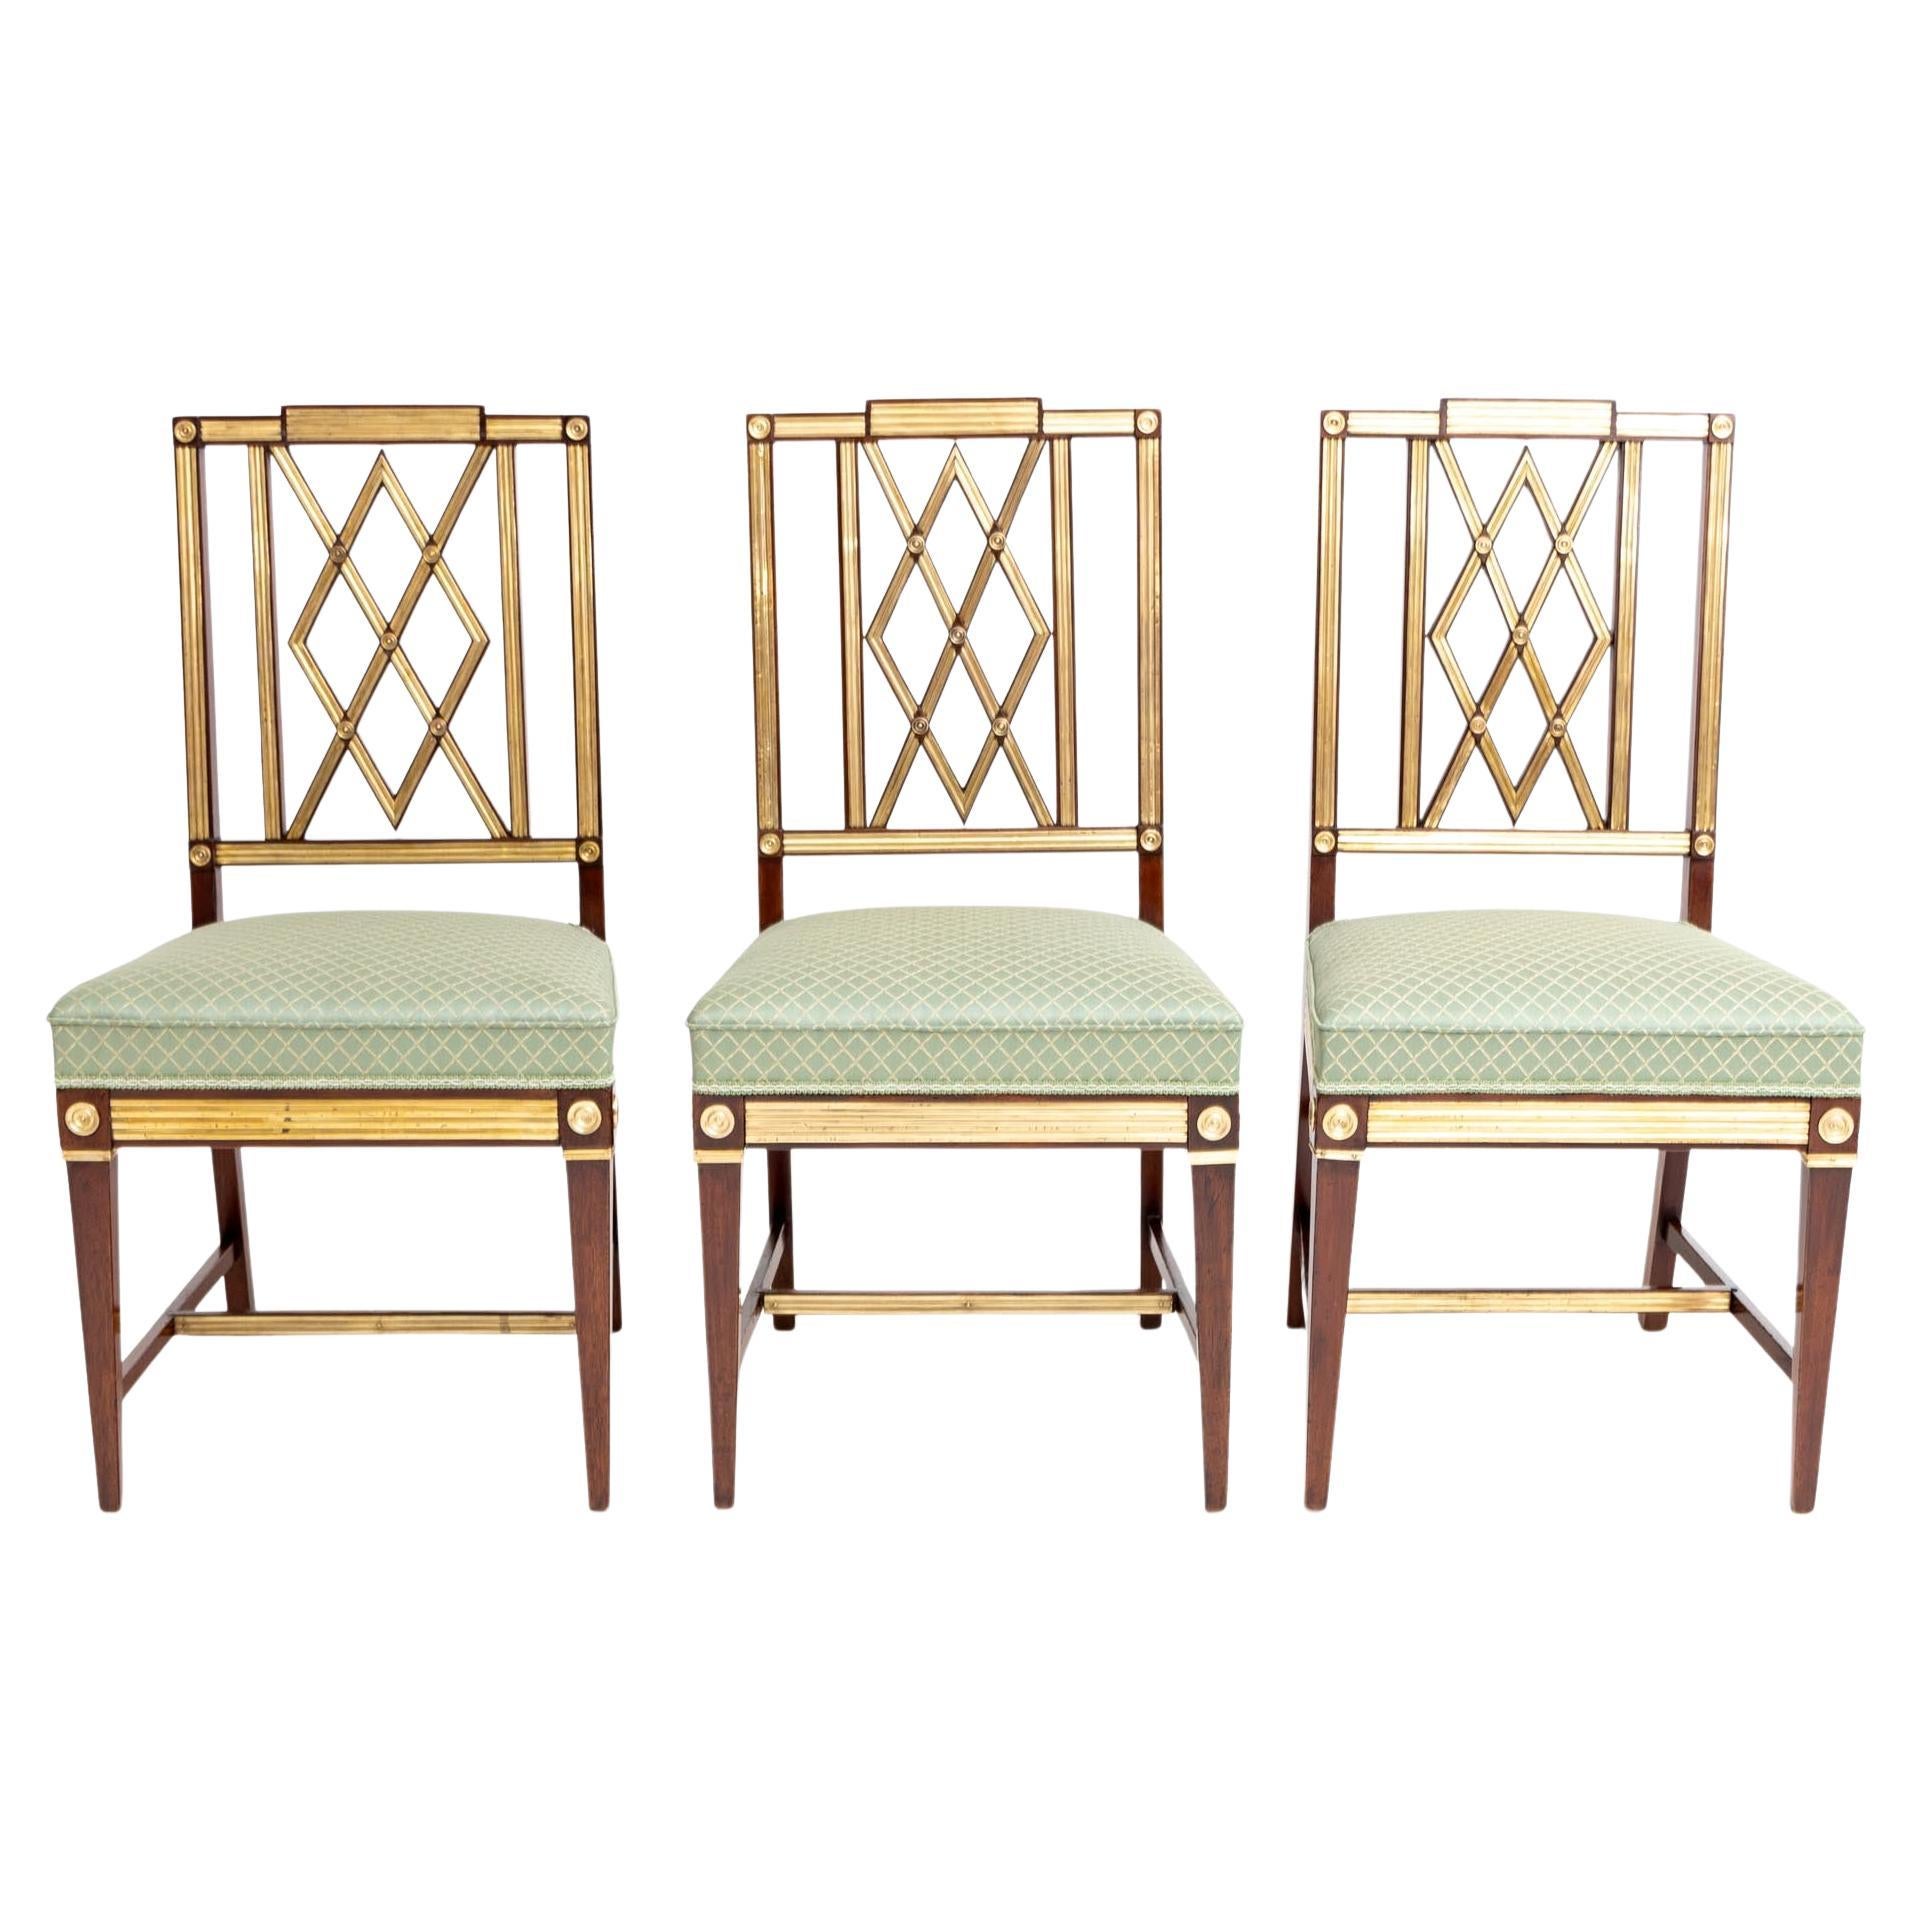 Neoclassical Dining Room Chairs, Baltic, End of 18th Century For Sale